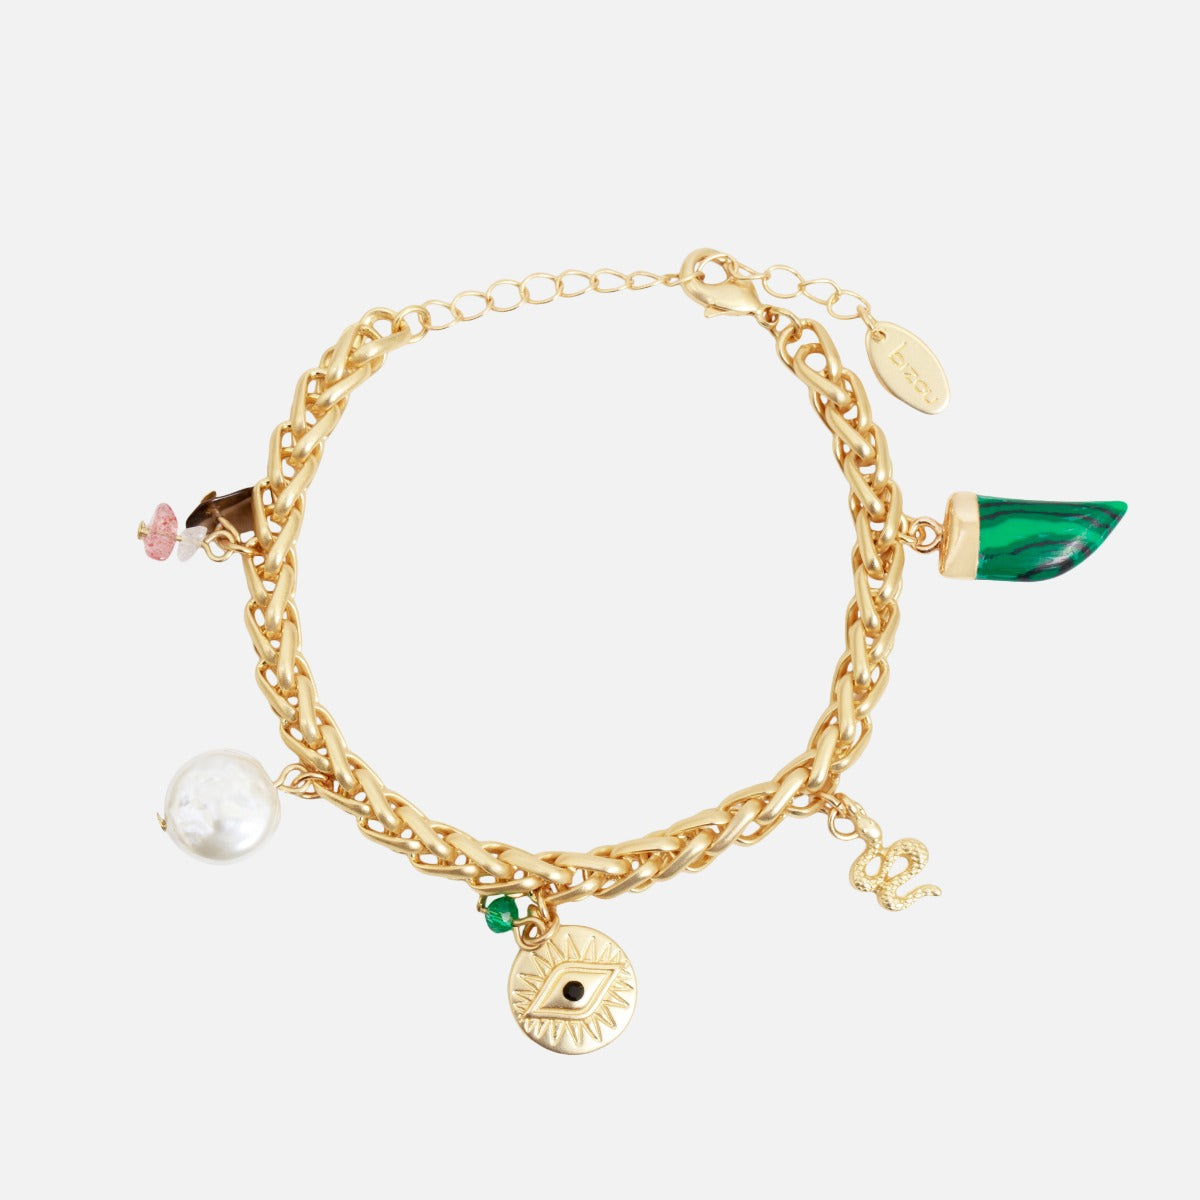 Twisted gold chain bracelet with lucky charms